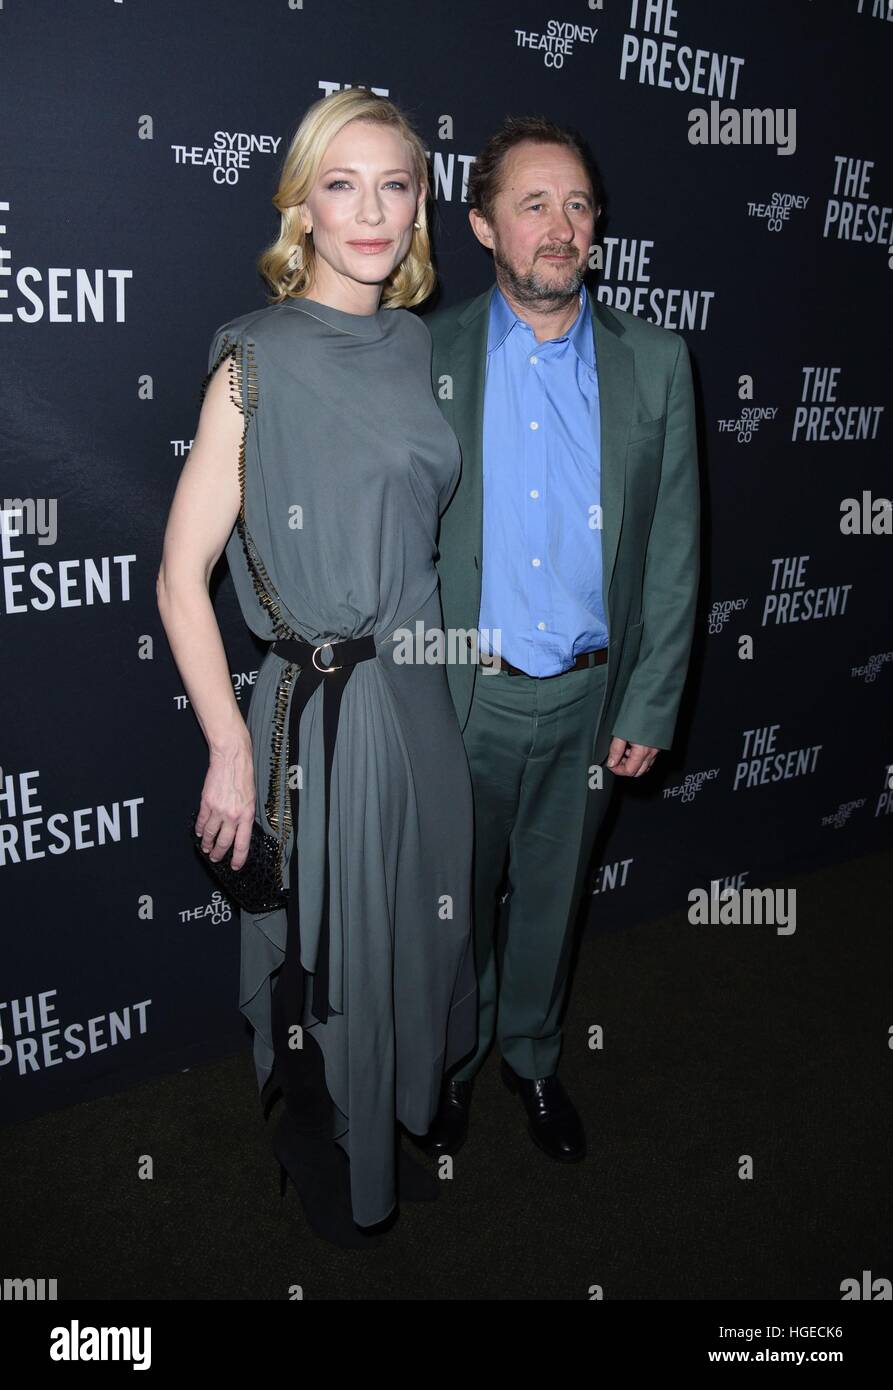 New York, NY, USA. 8th Jan, 2017. Cate Blanchett, Andrew Upton in attendance for THE PRESENT Opening Night on Broadway, The Barrymore Theatre, New York, NY January 8, 2017. © Derek Storm/Everett Collection/Alamy Live News Stock Photo